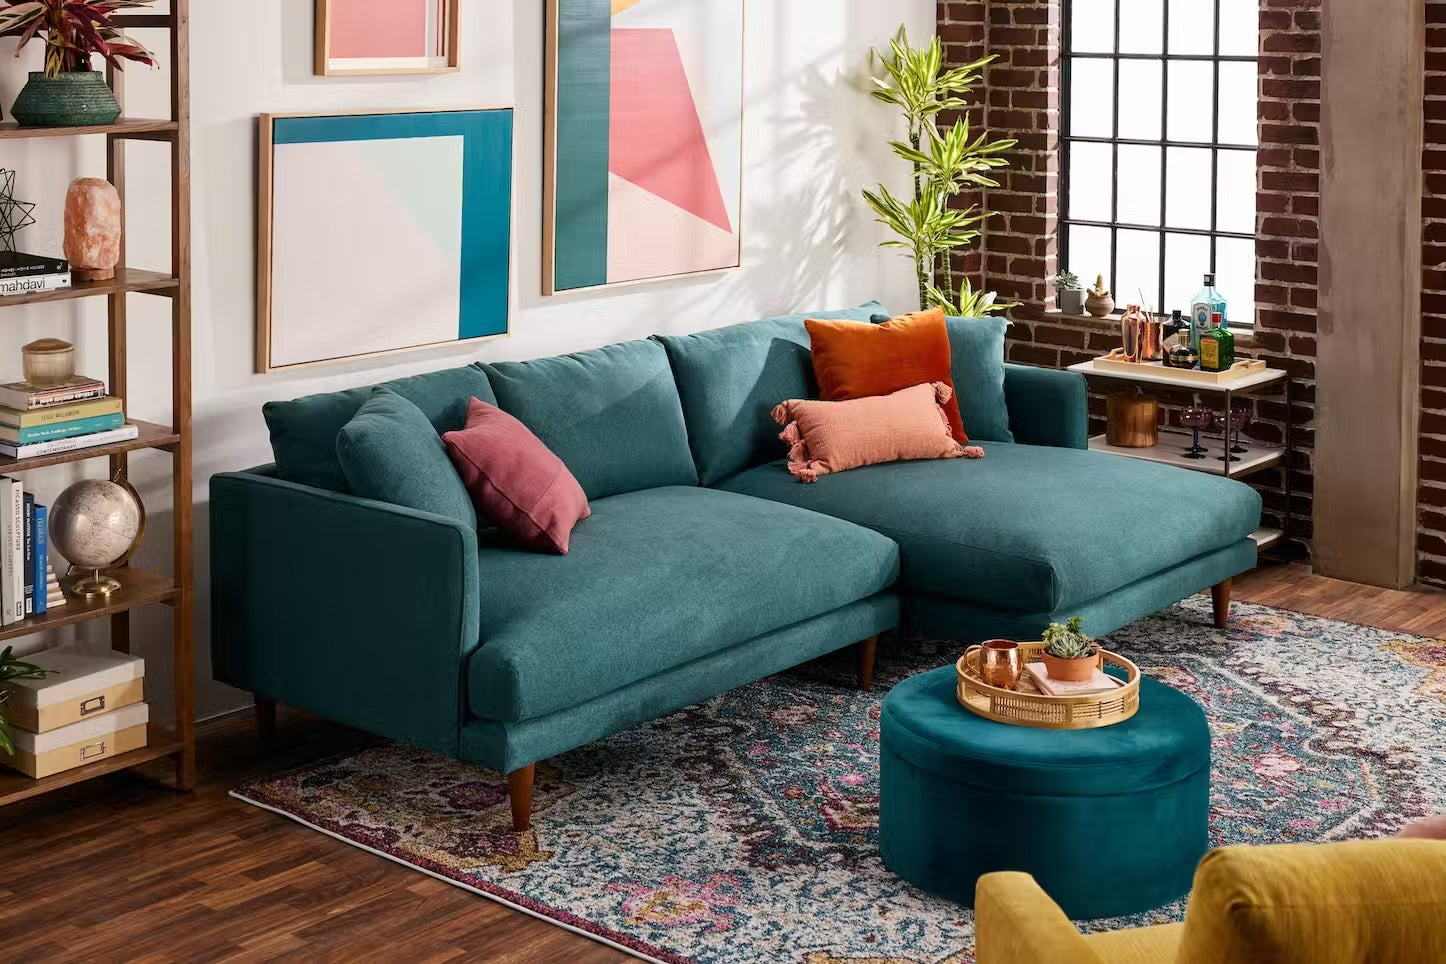 A stylish living room features a teal sectional sofa adorned with colorful cushions and a matching round ottoman. Abstract art pieces decorate the walls, and a large window allows natural light to fill the space. A rug accents the wooden floor and a plant adds greenery.